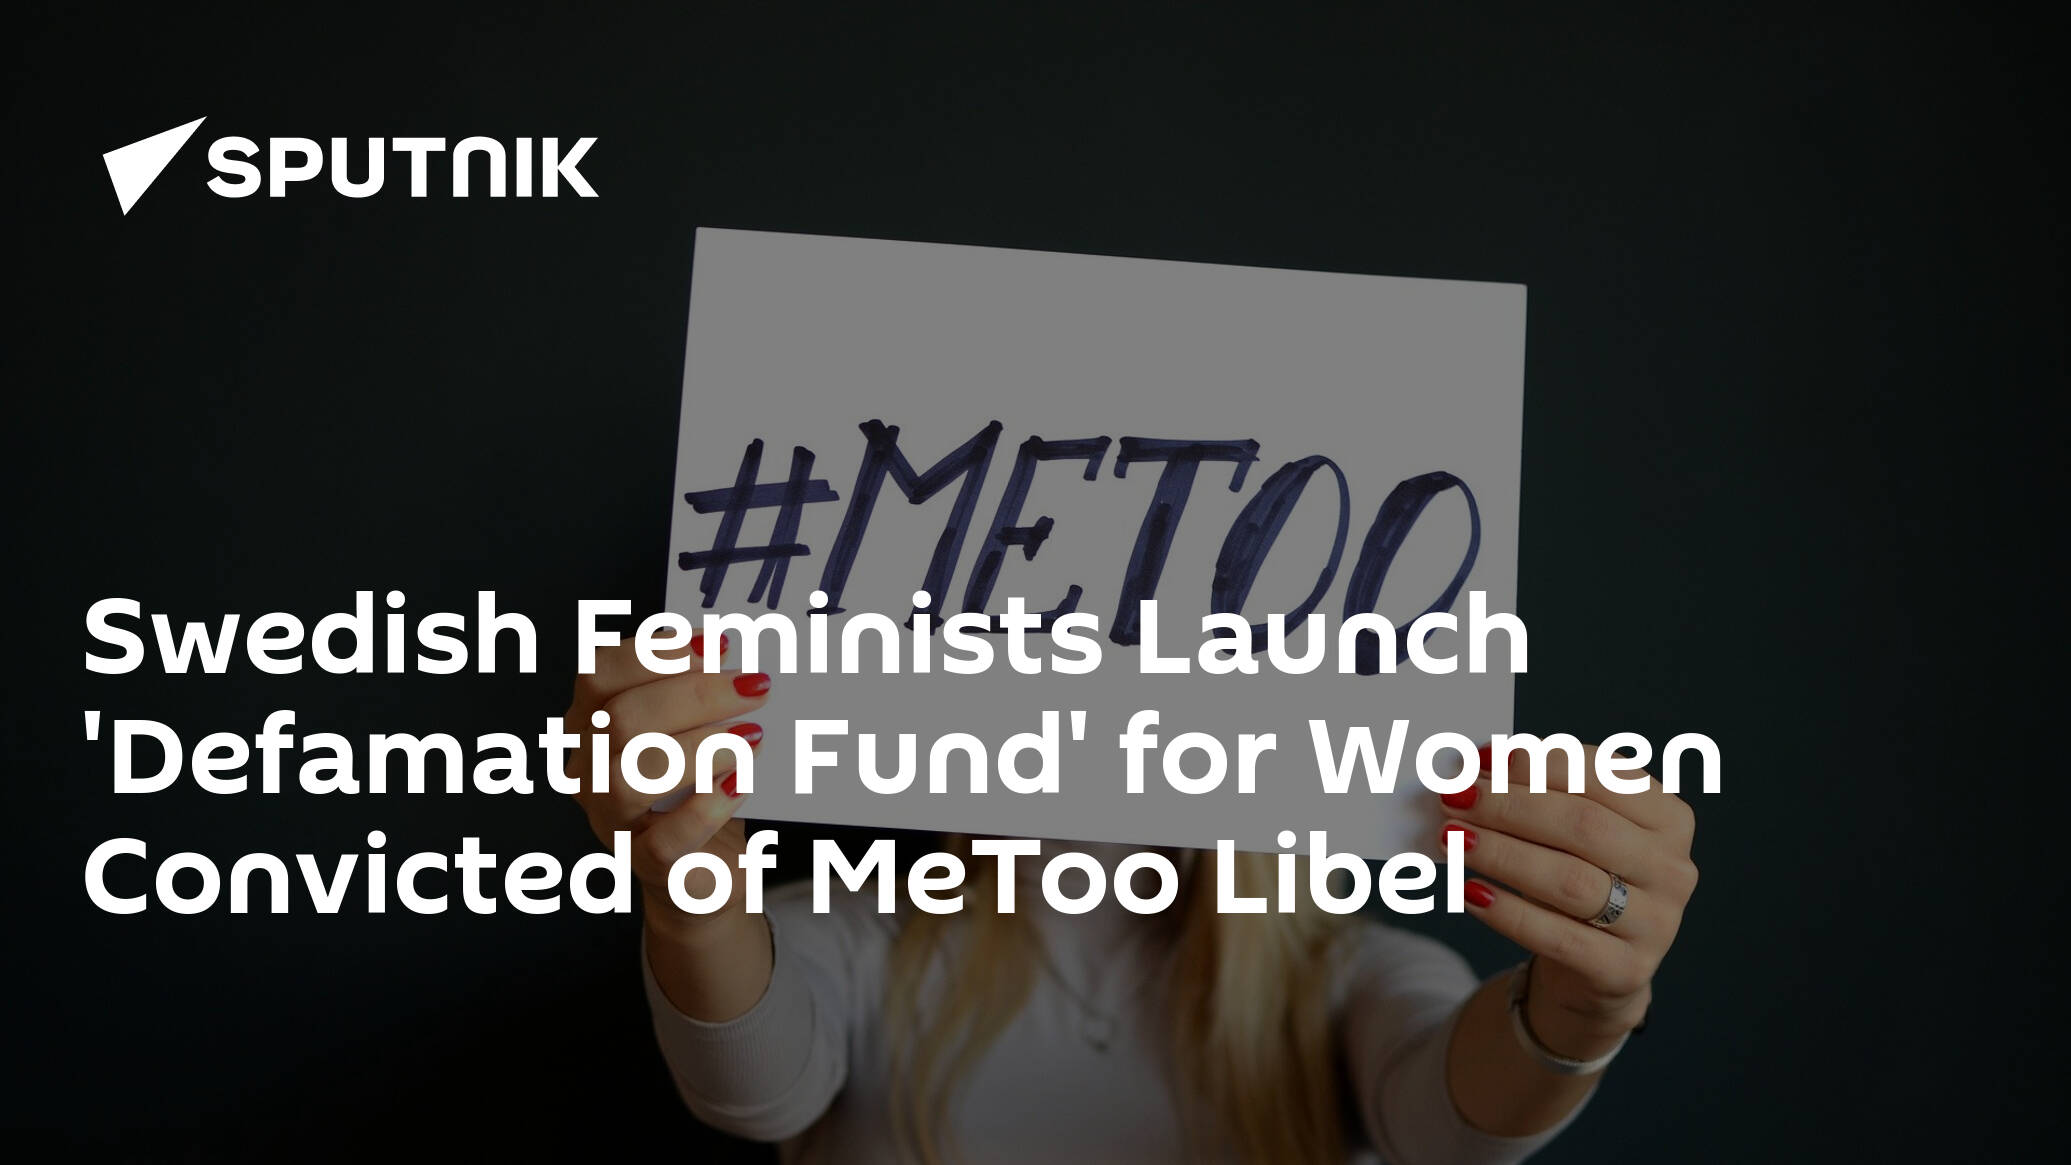 Swedish Feminists Launch Defamation Fund For Women Convicted Of Metoo Libel